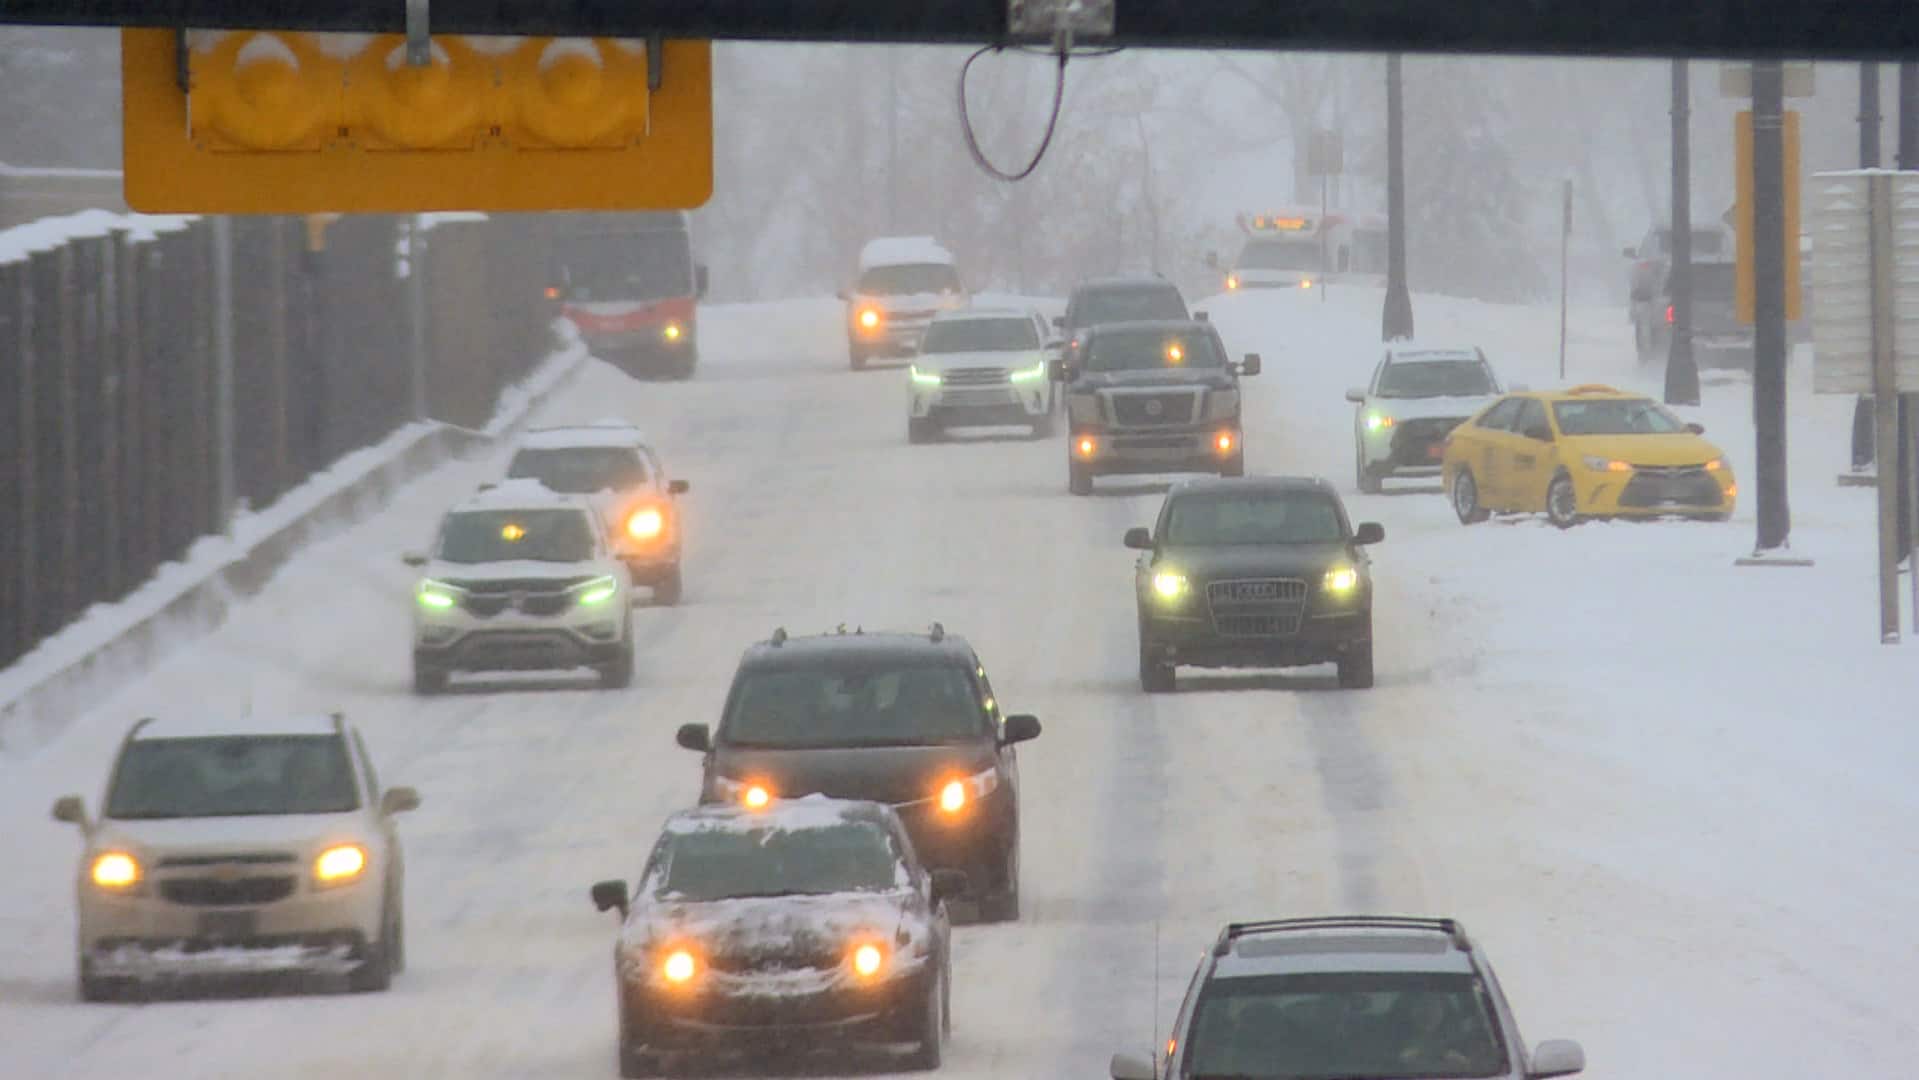 flights classes cancelled and power outages reported as winter storm grips parts of canada 3